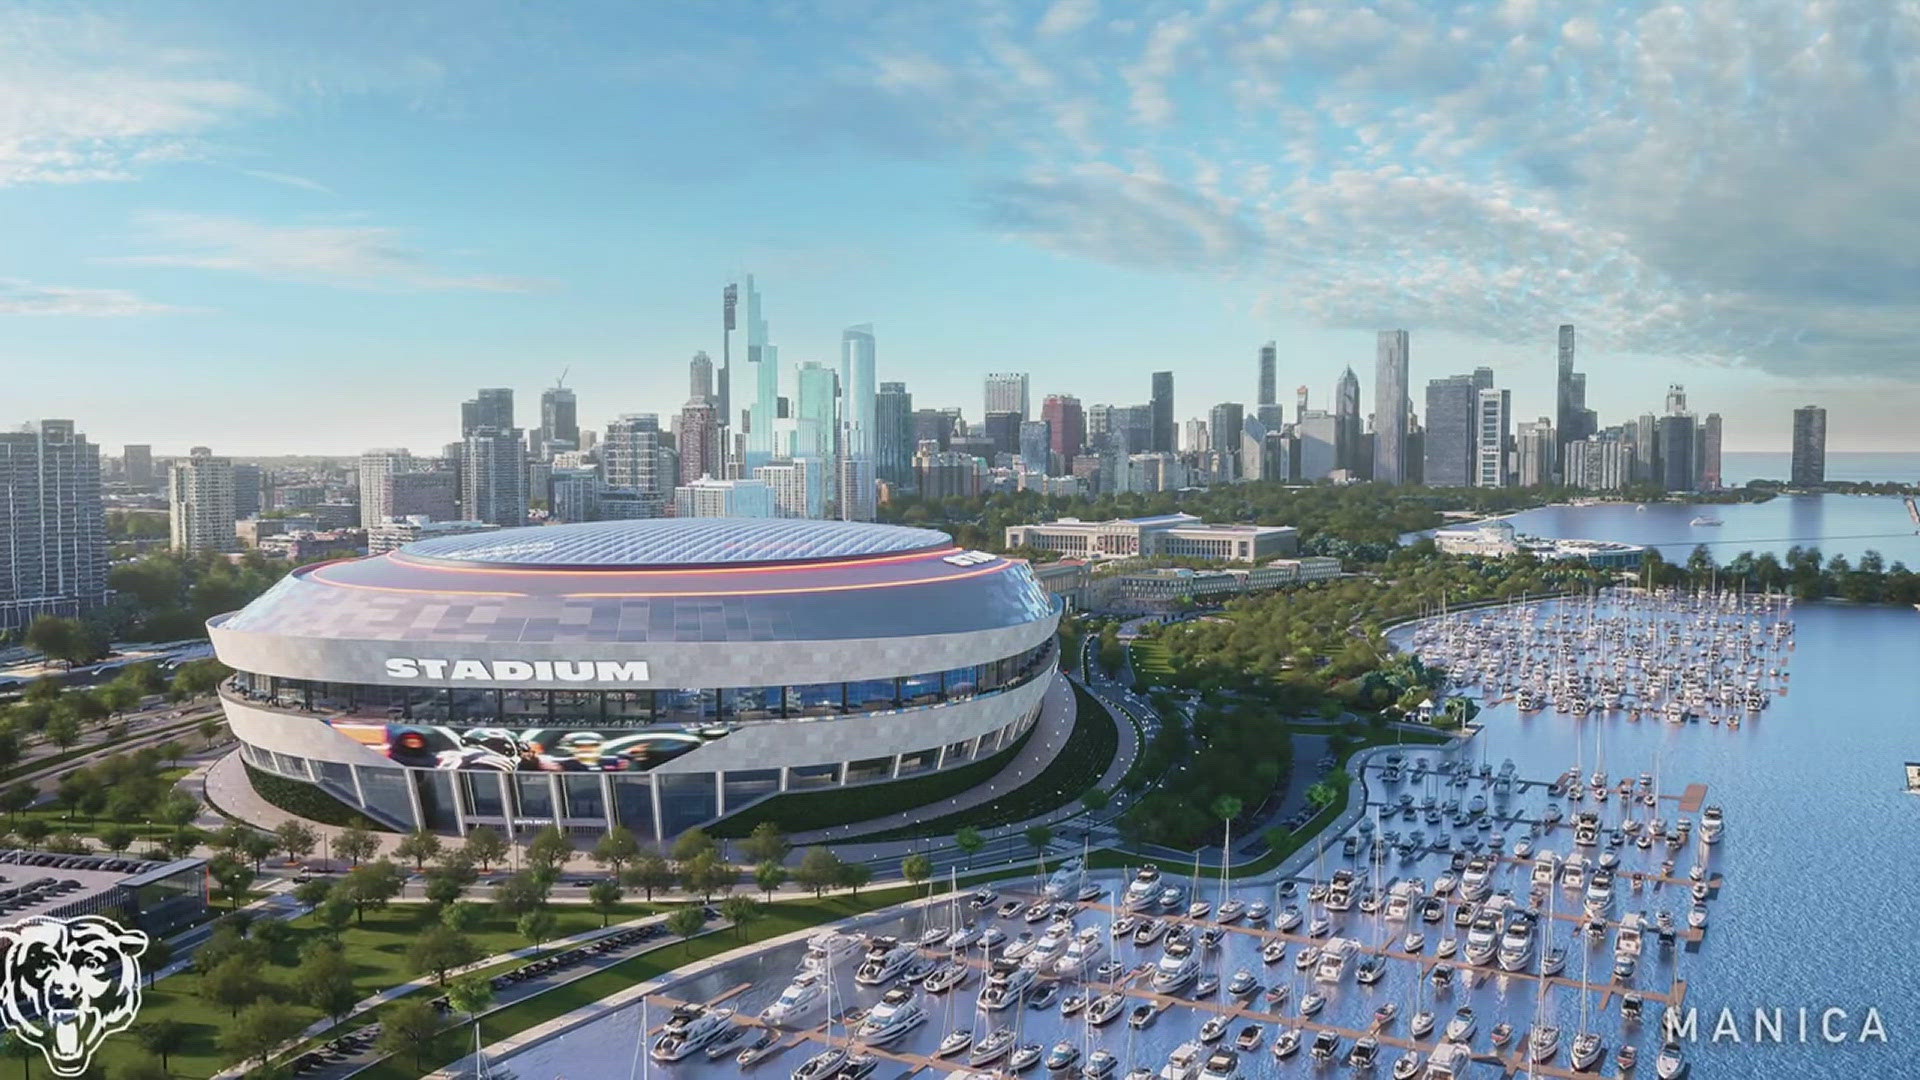 The Bears said they'd provide more than $2 billion dollars for the project, which would cover around 70%. They want the rest to be covered by the public.